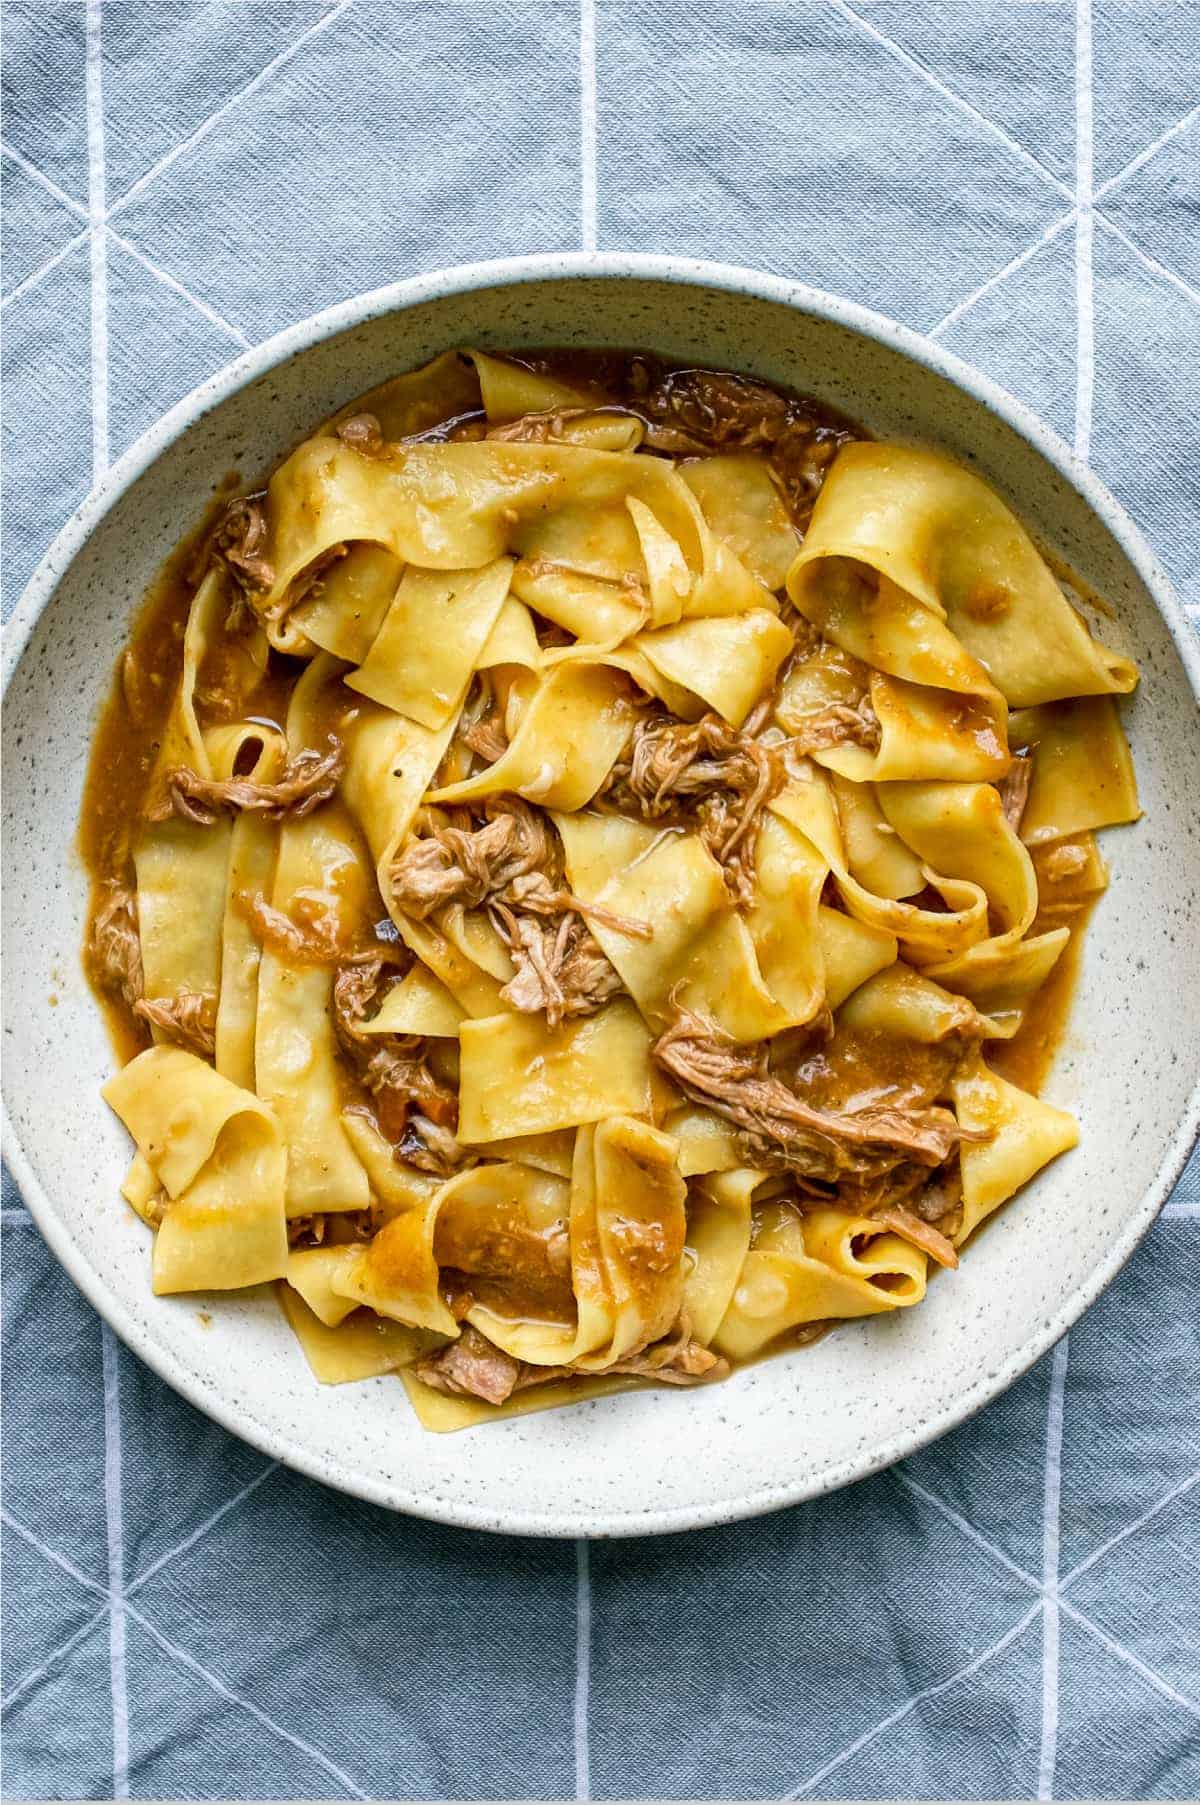 A bowl of pappardelle pasta with a lamb ragu sauce on a blue tea towel background